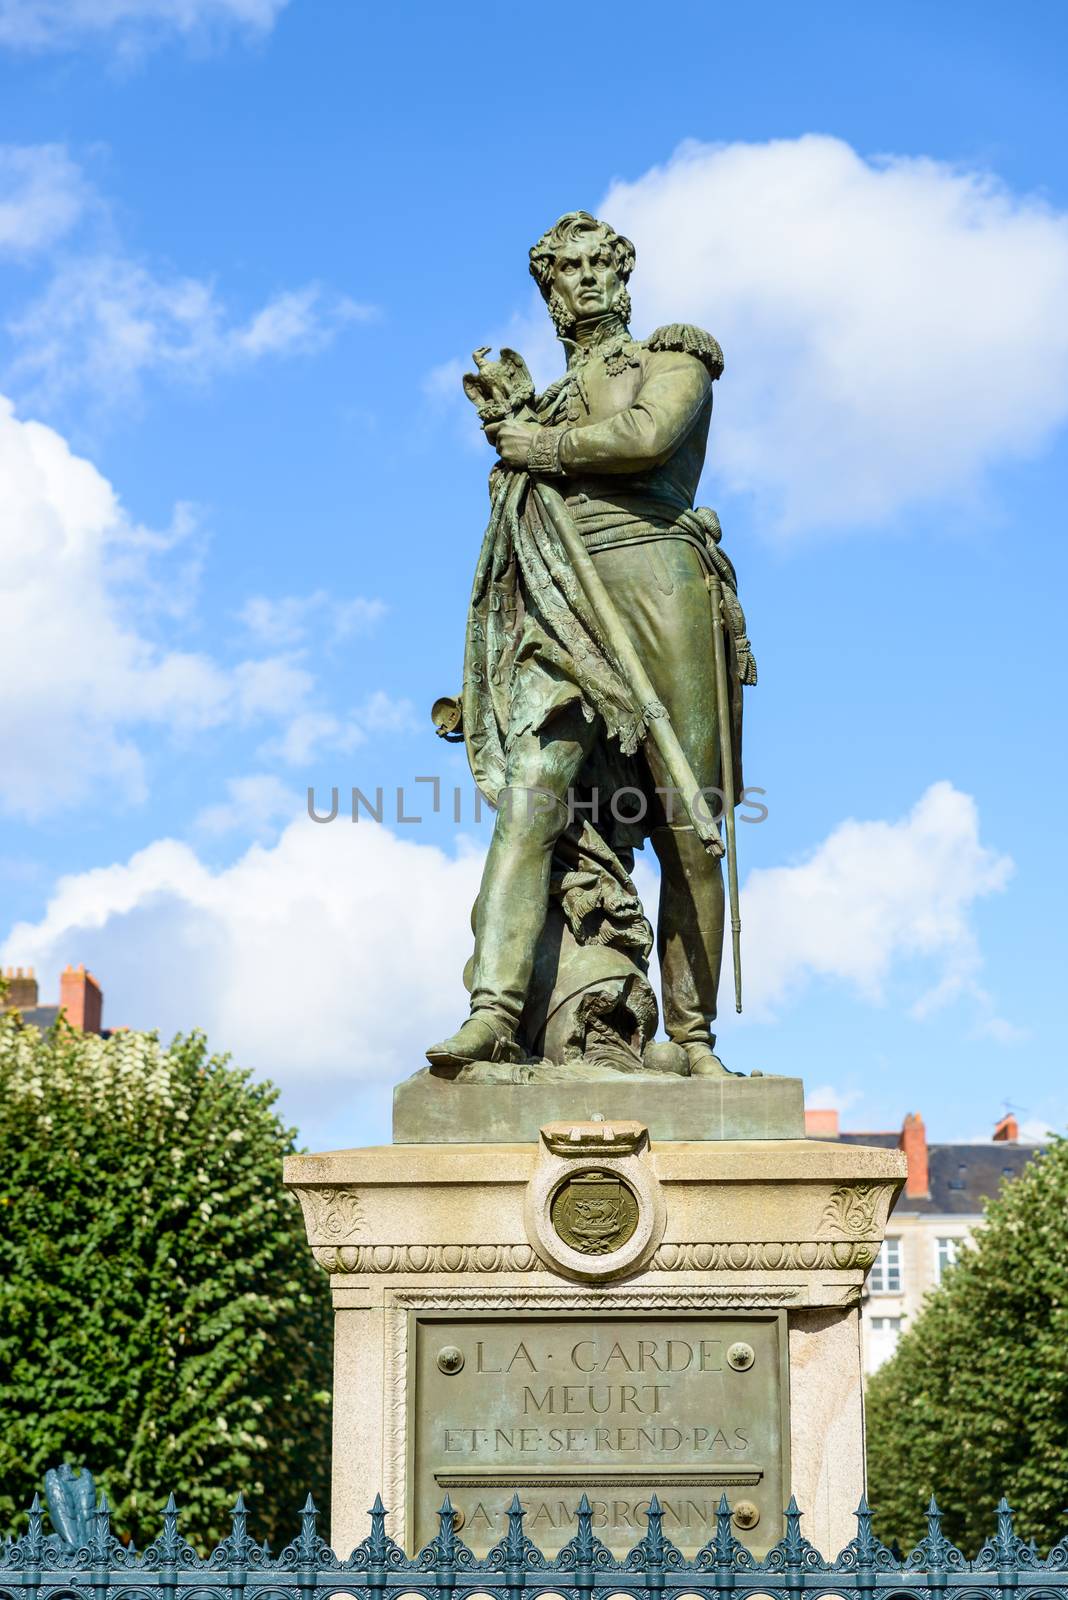 General Cambronne statue in Nantes by dutourdumonde